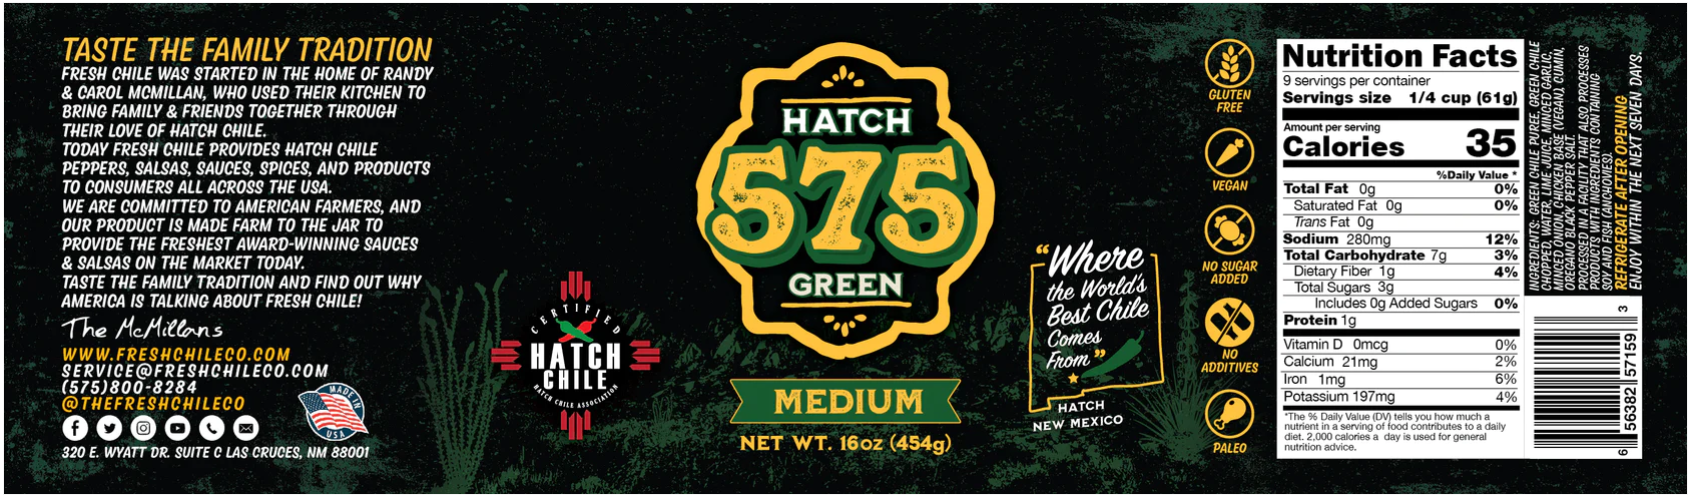 Hatch 575 Green Chile Sauce